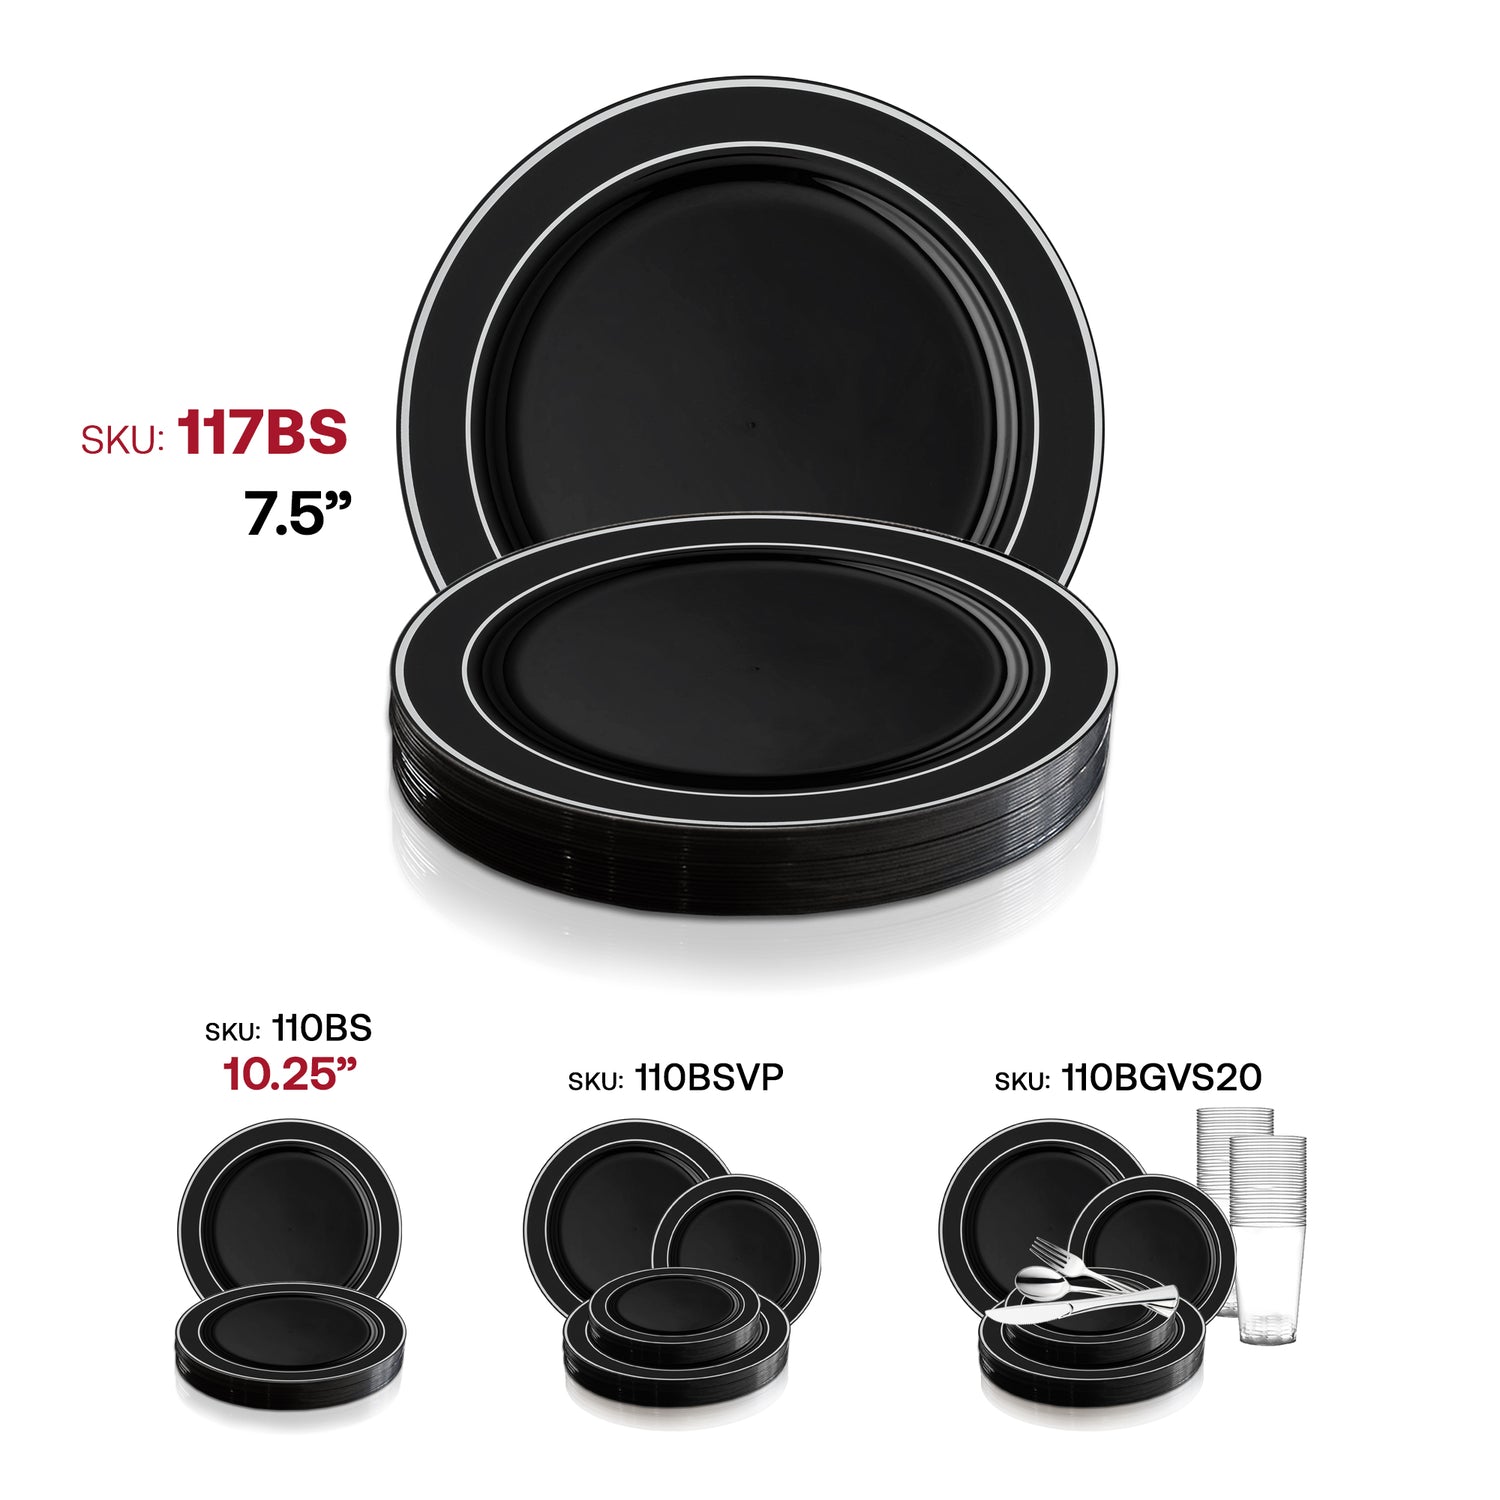 Black with Silver Edge Rim Plastic Appetizer/Salad Plates (7.5") SKU  | The Kaya Collection